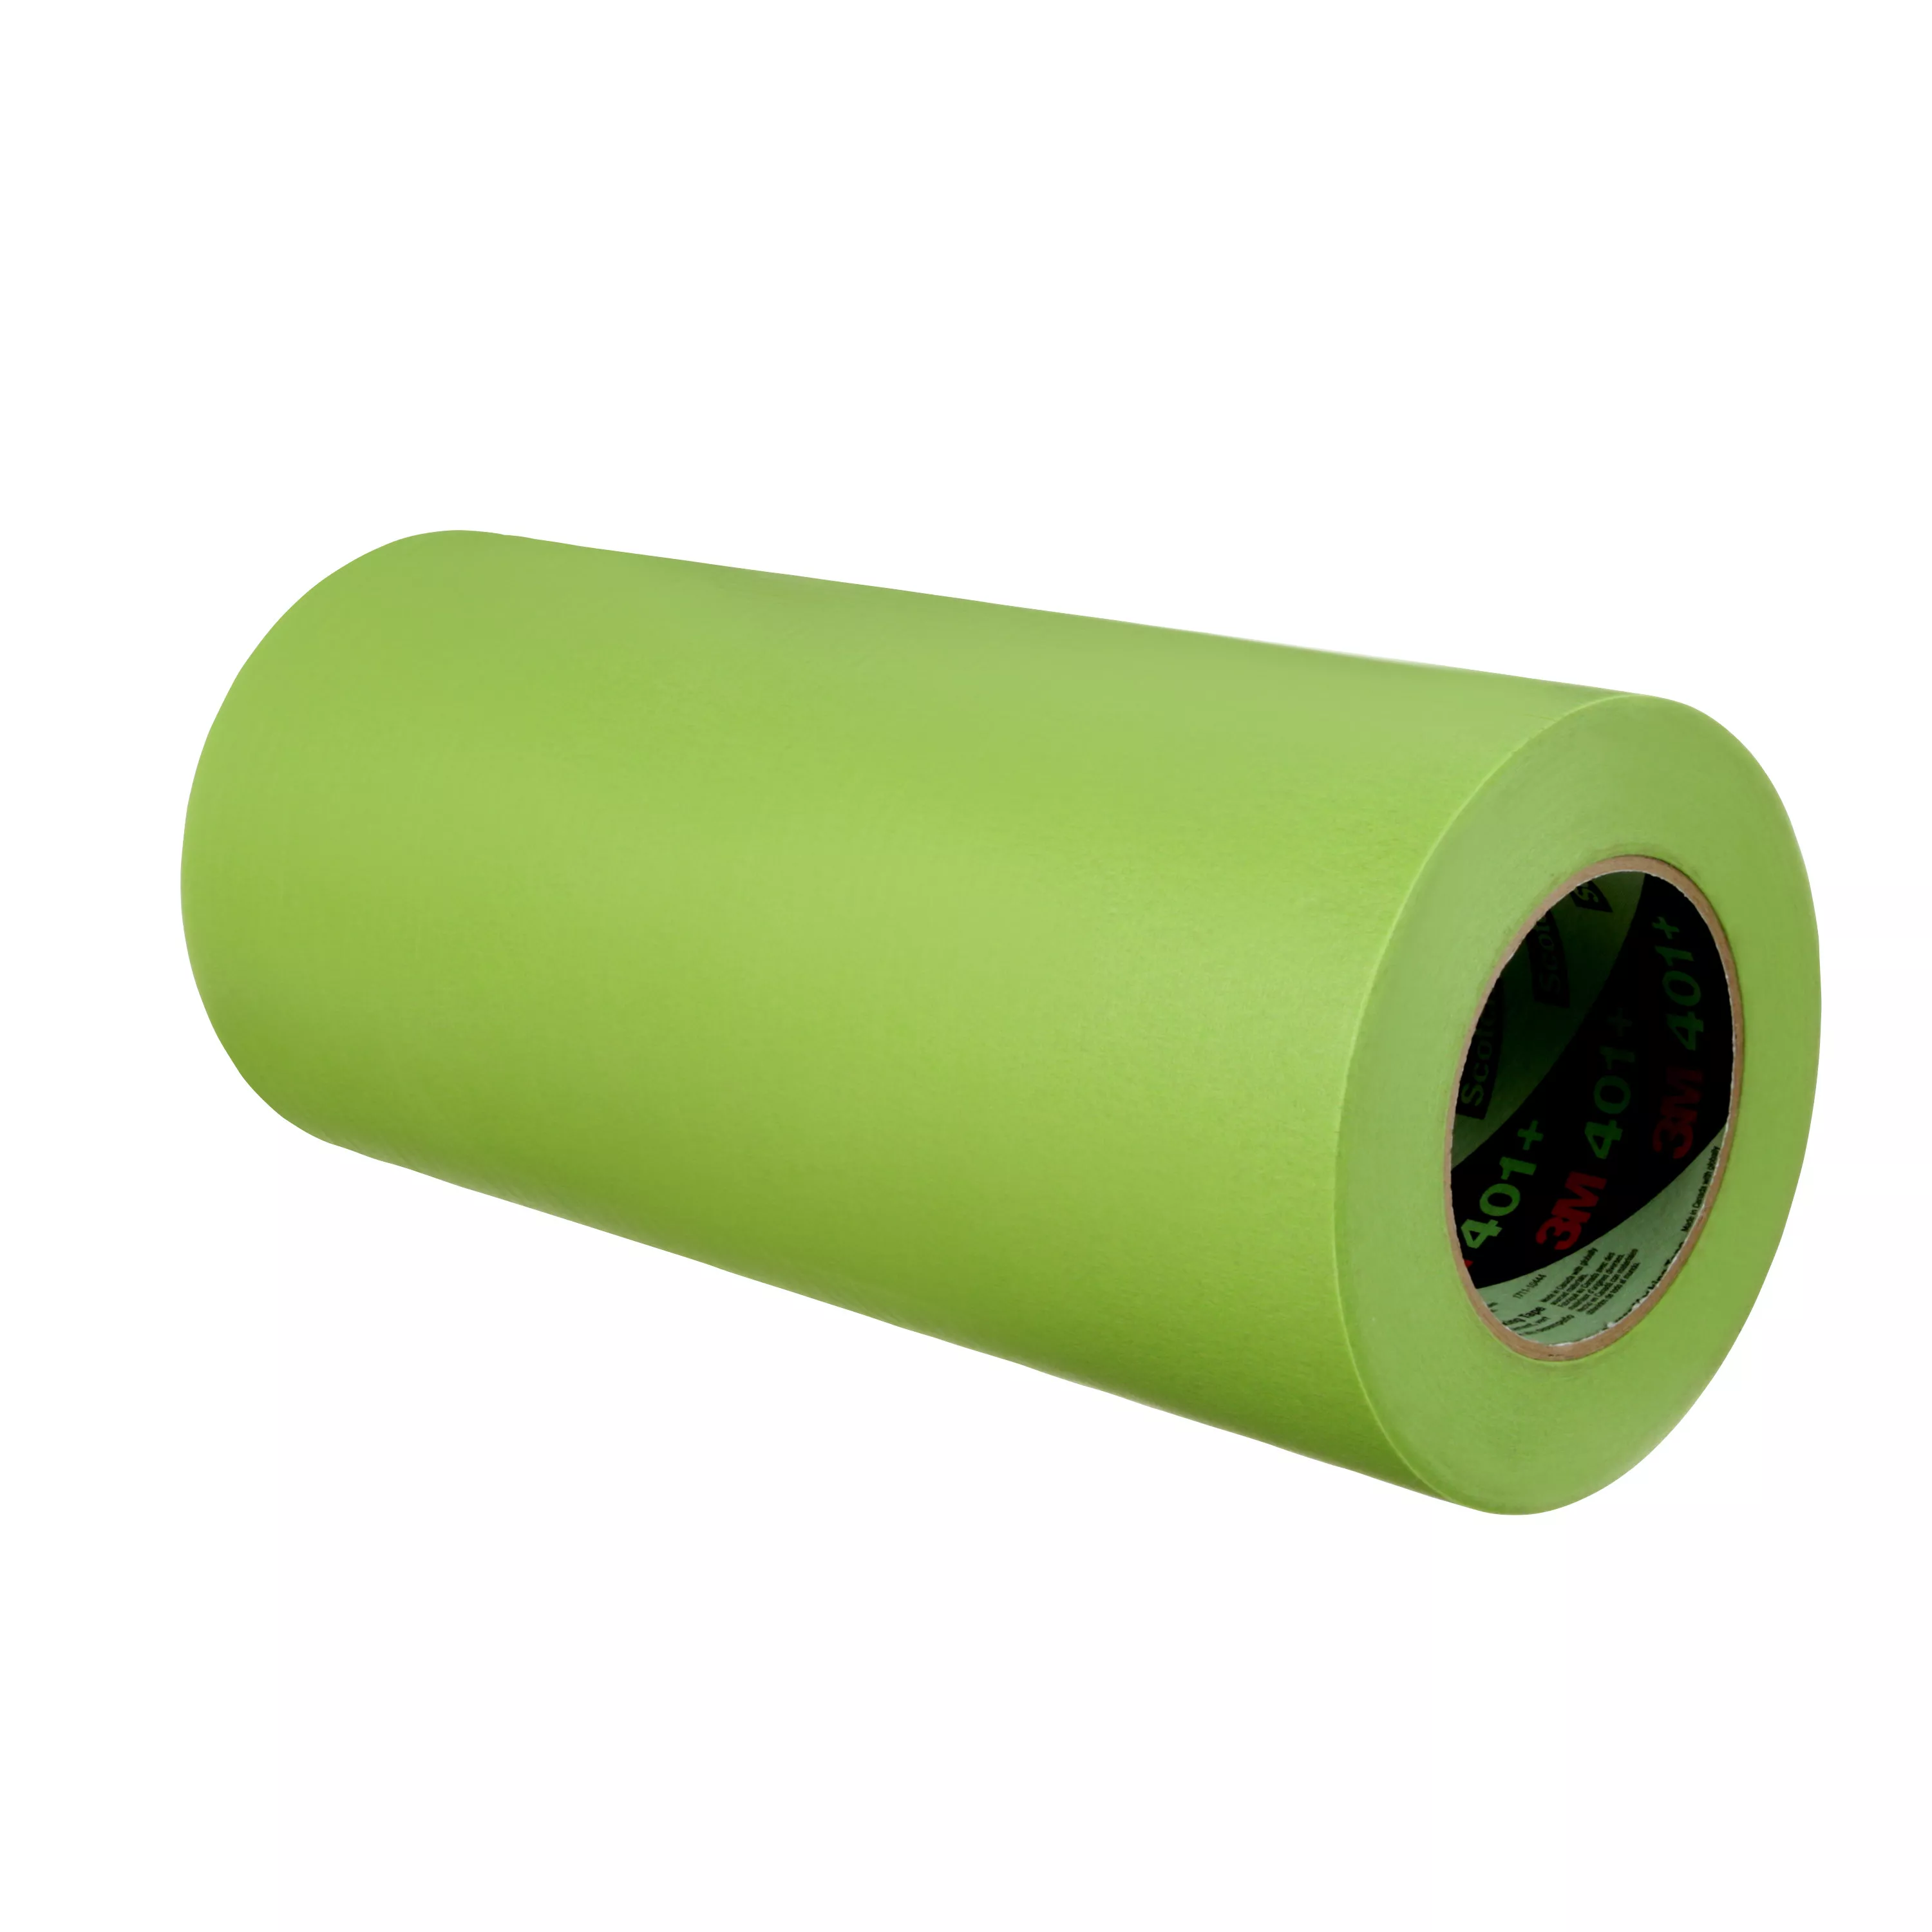 Product Number 401+ | 3M™ High Performance Green Masking Tape 401+